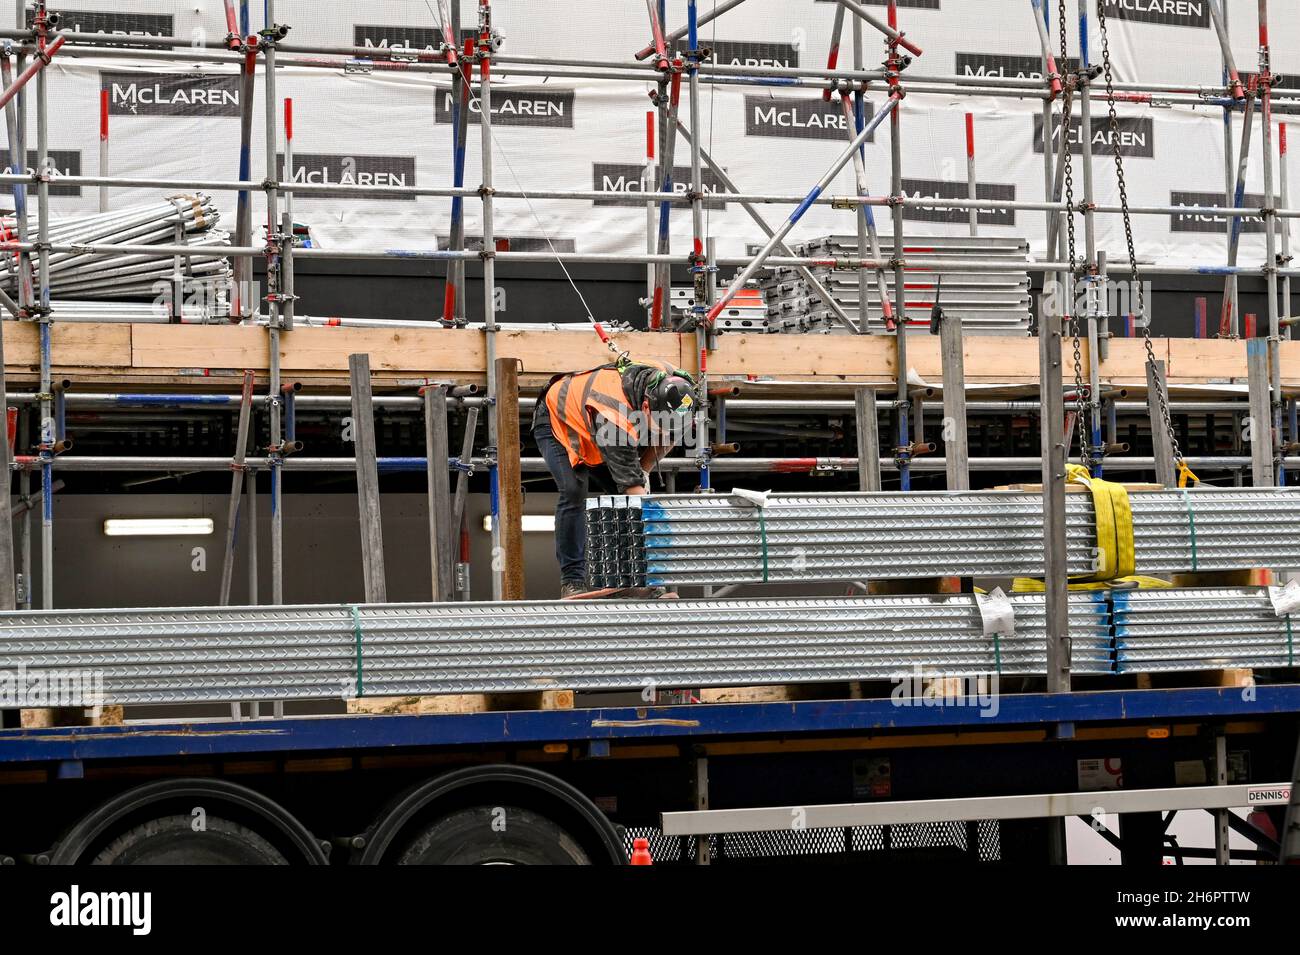 London, England - August 2021: Construction worker wearing safety harness preparing for a load of steel building materials to be lifted by crane Stock Photo